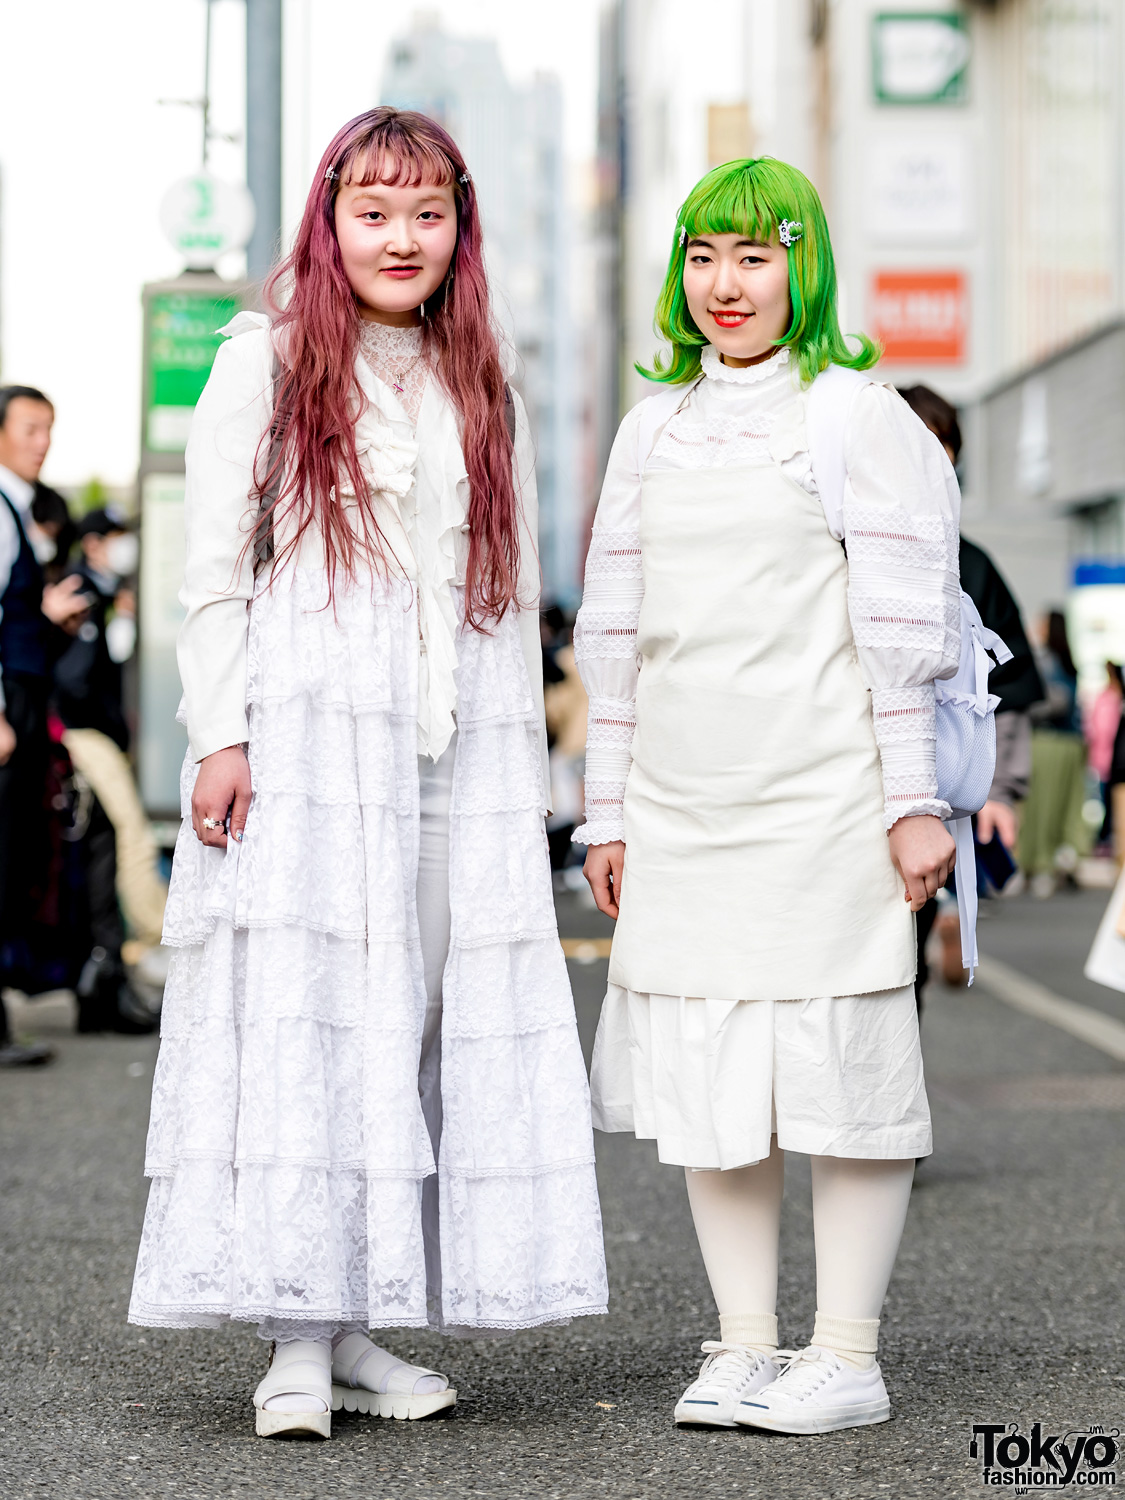 Pink & Green-Haired Japanese Girls in All White Layered Streetwear Styles –  Tokyo Fashion